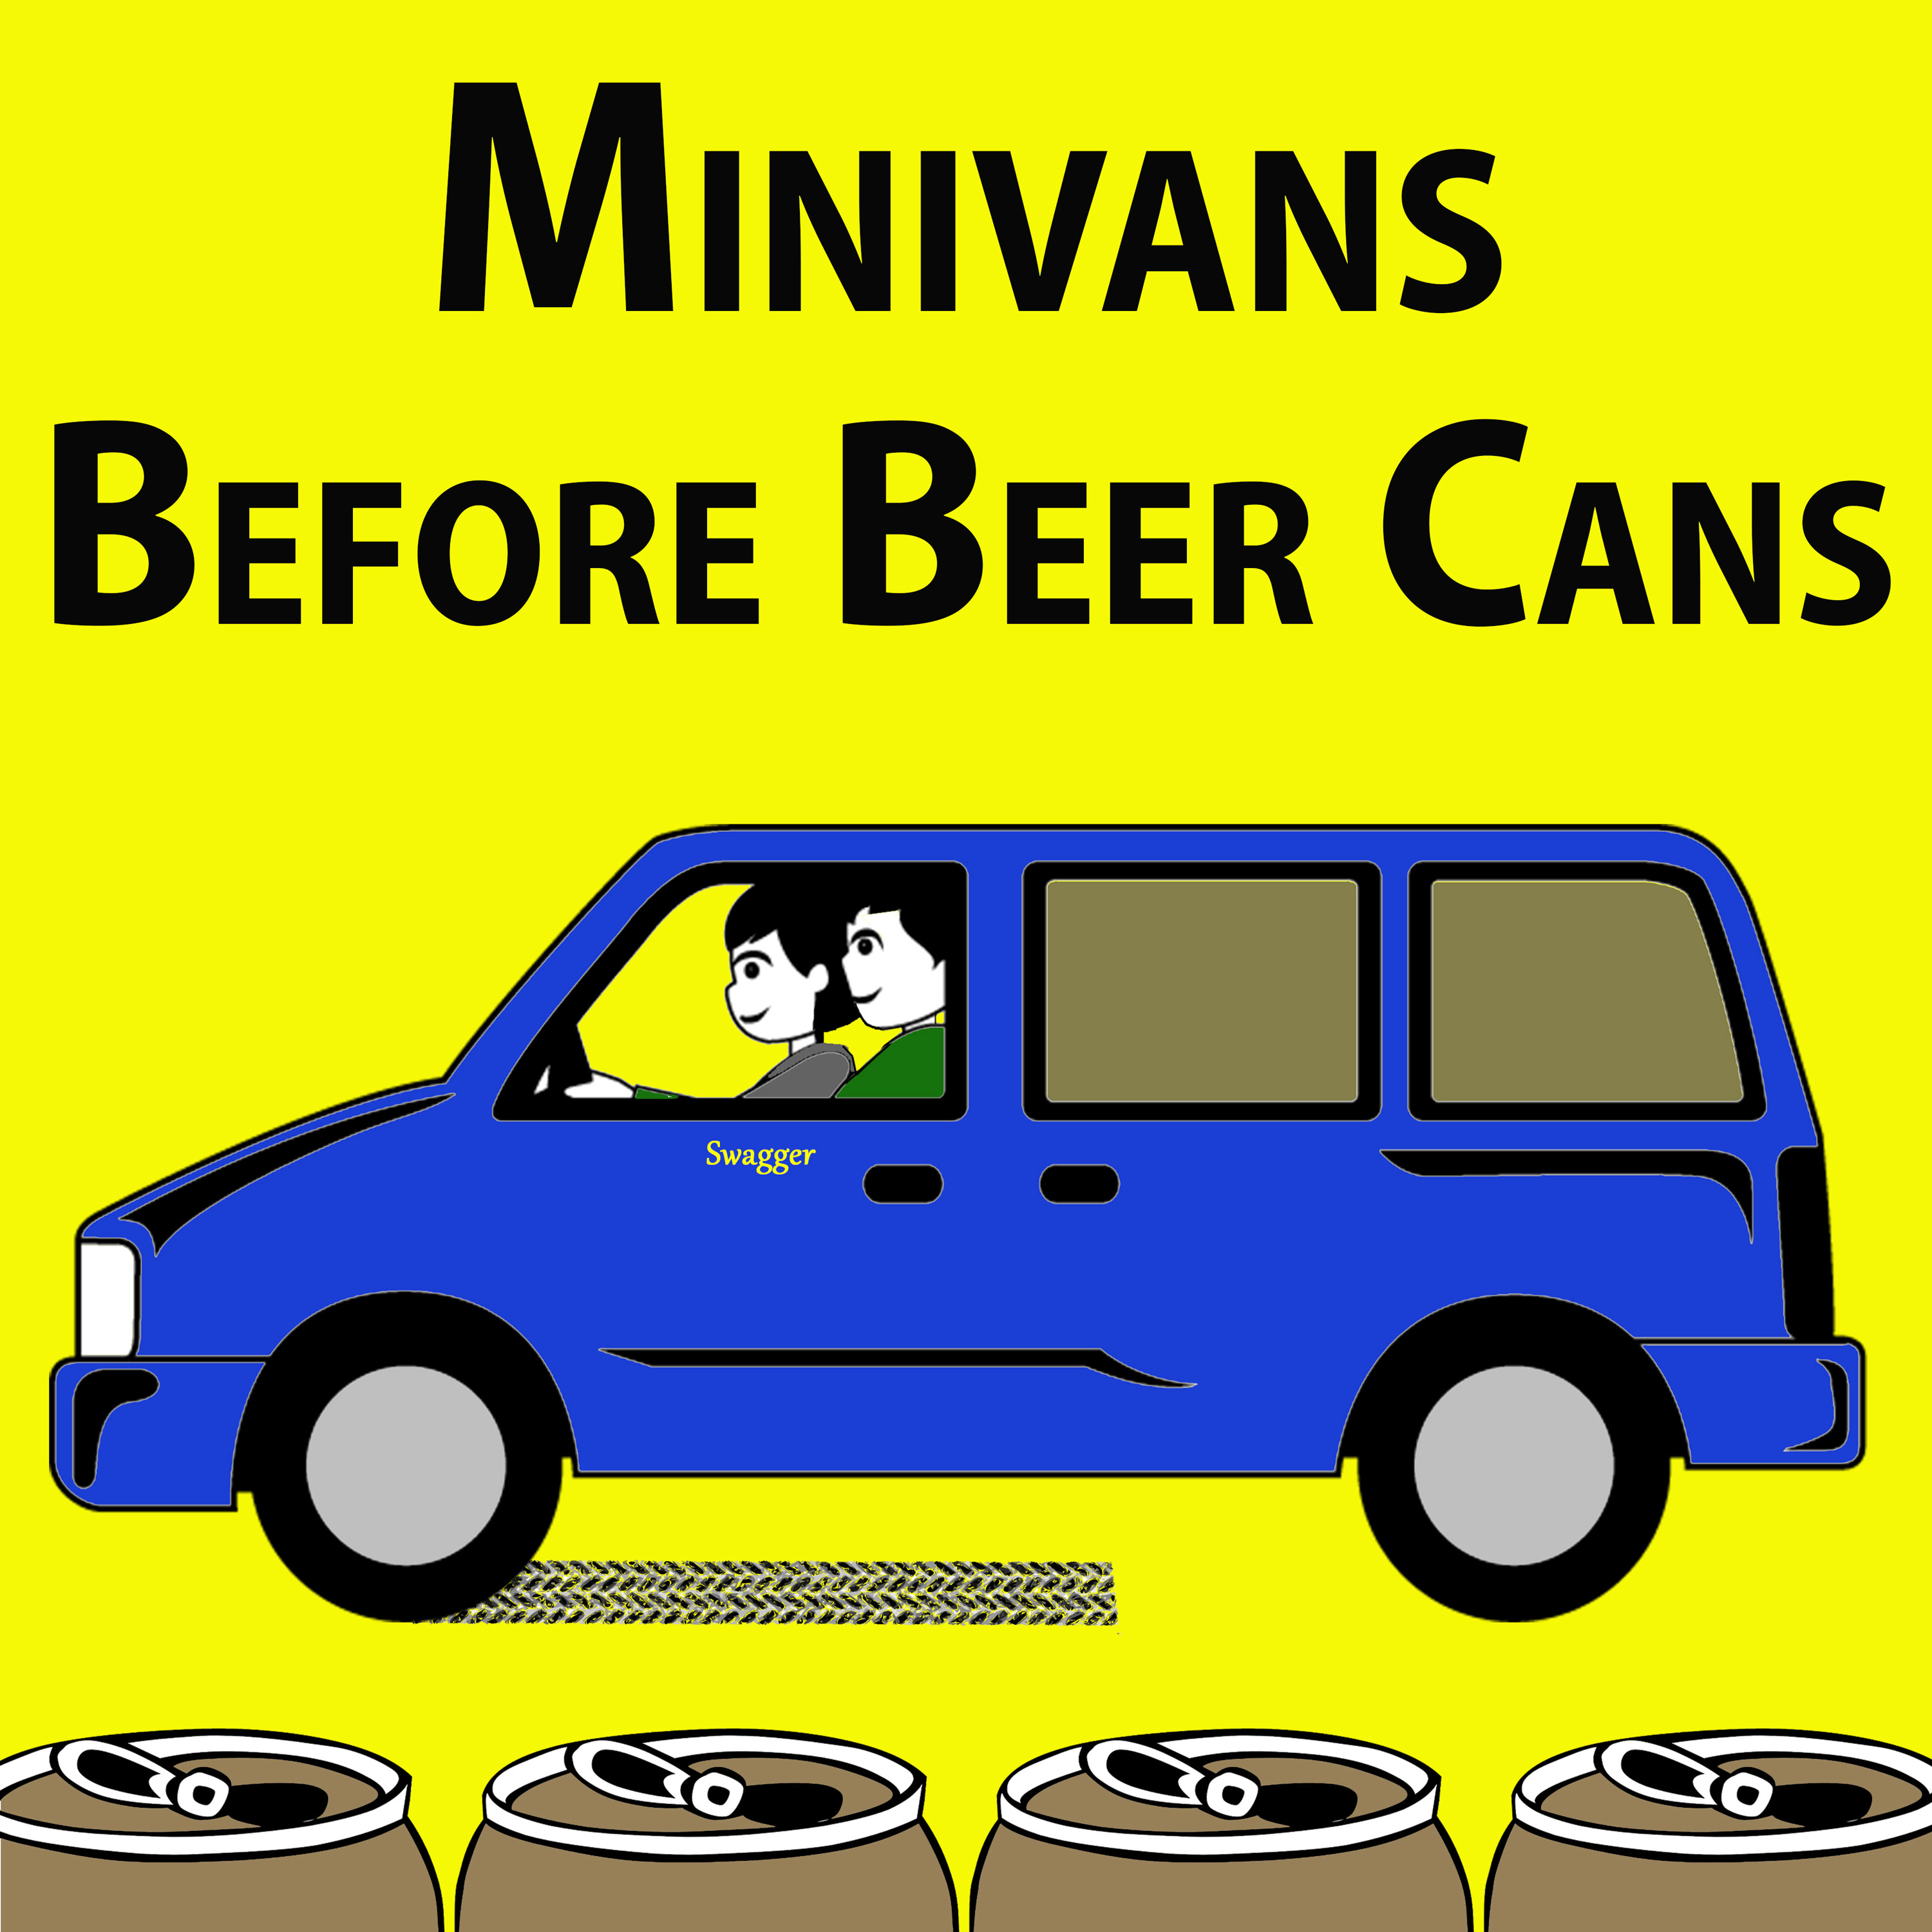 Minivans Before Beer Cans - Finding the Comedy in Parenting